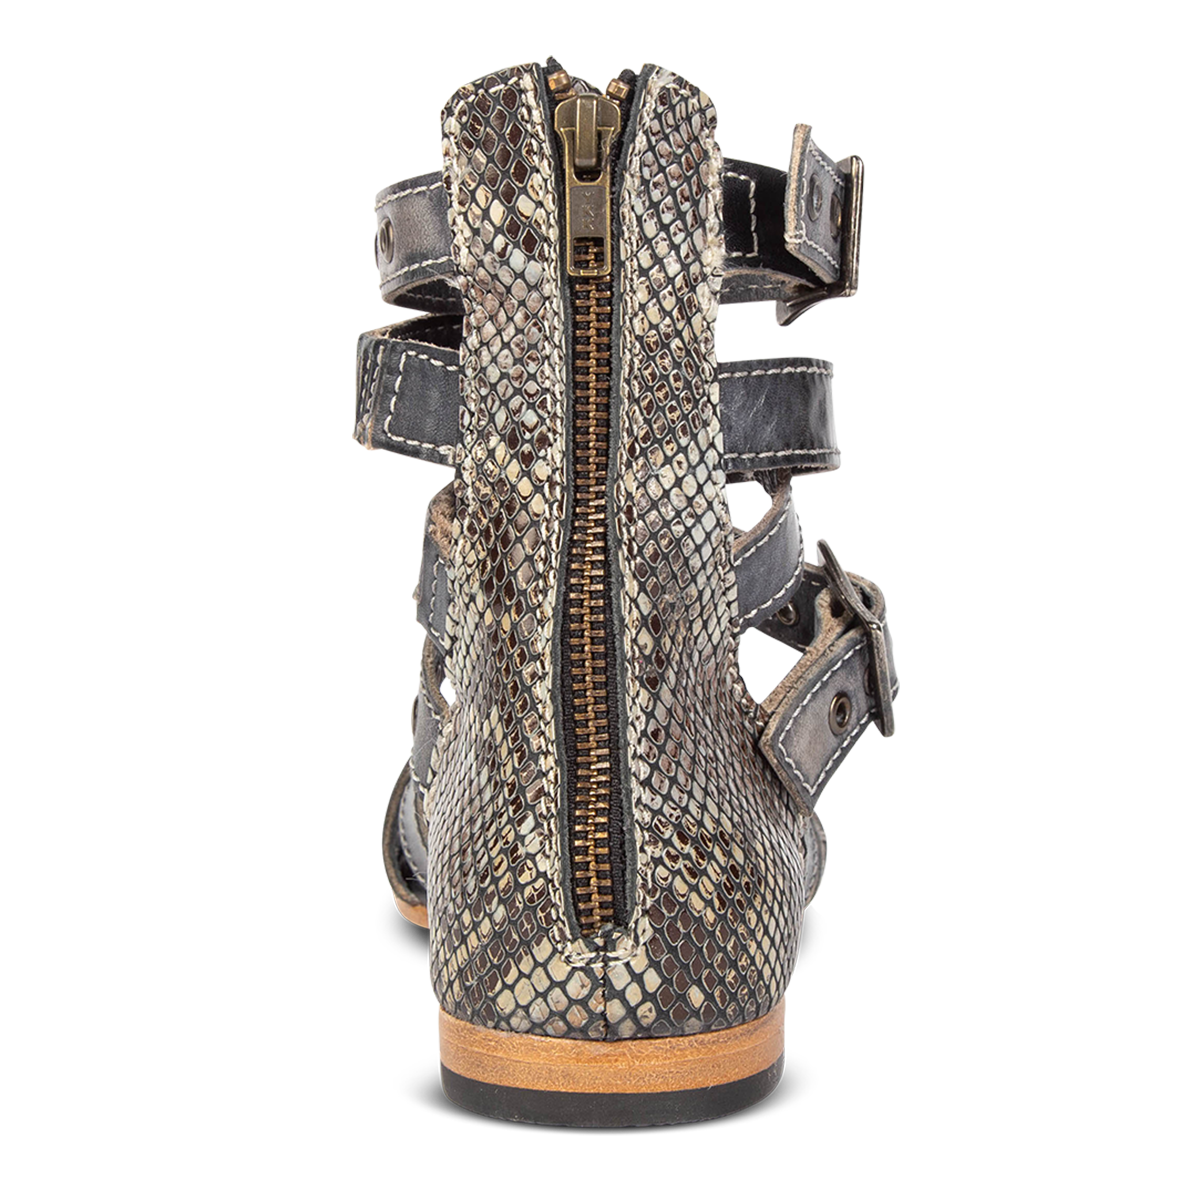 Back view showing FREEBIRD embossed leather on women's Saylor blue snake multi low heeled sandal